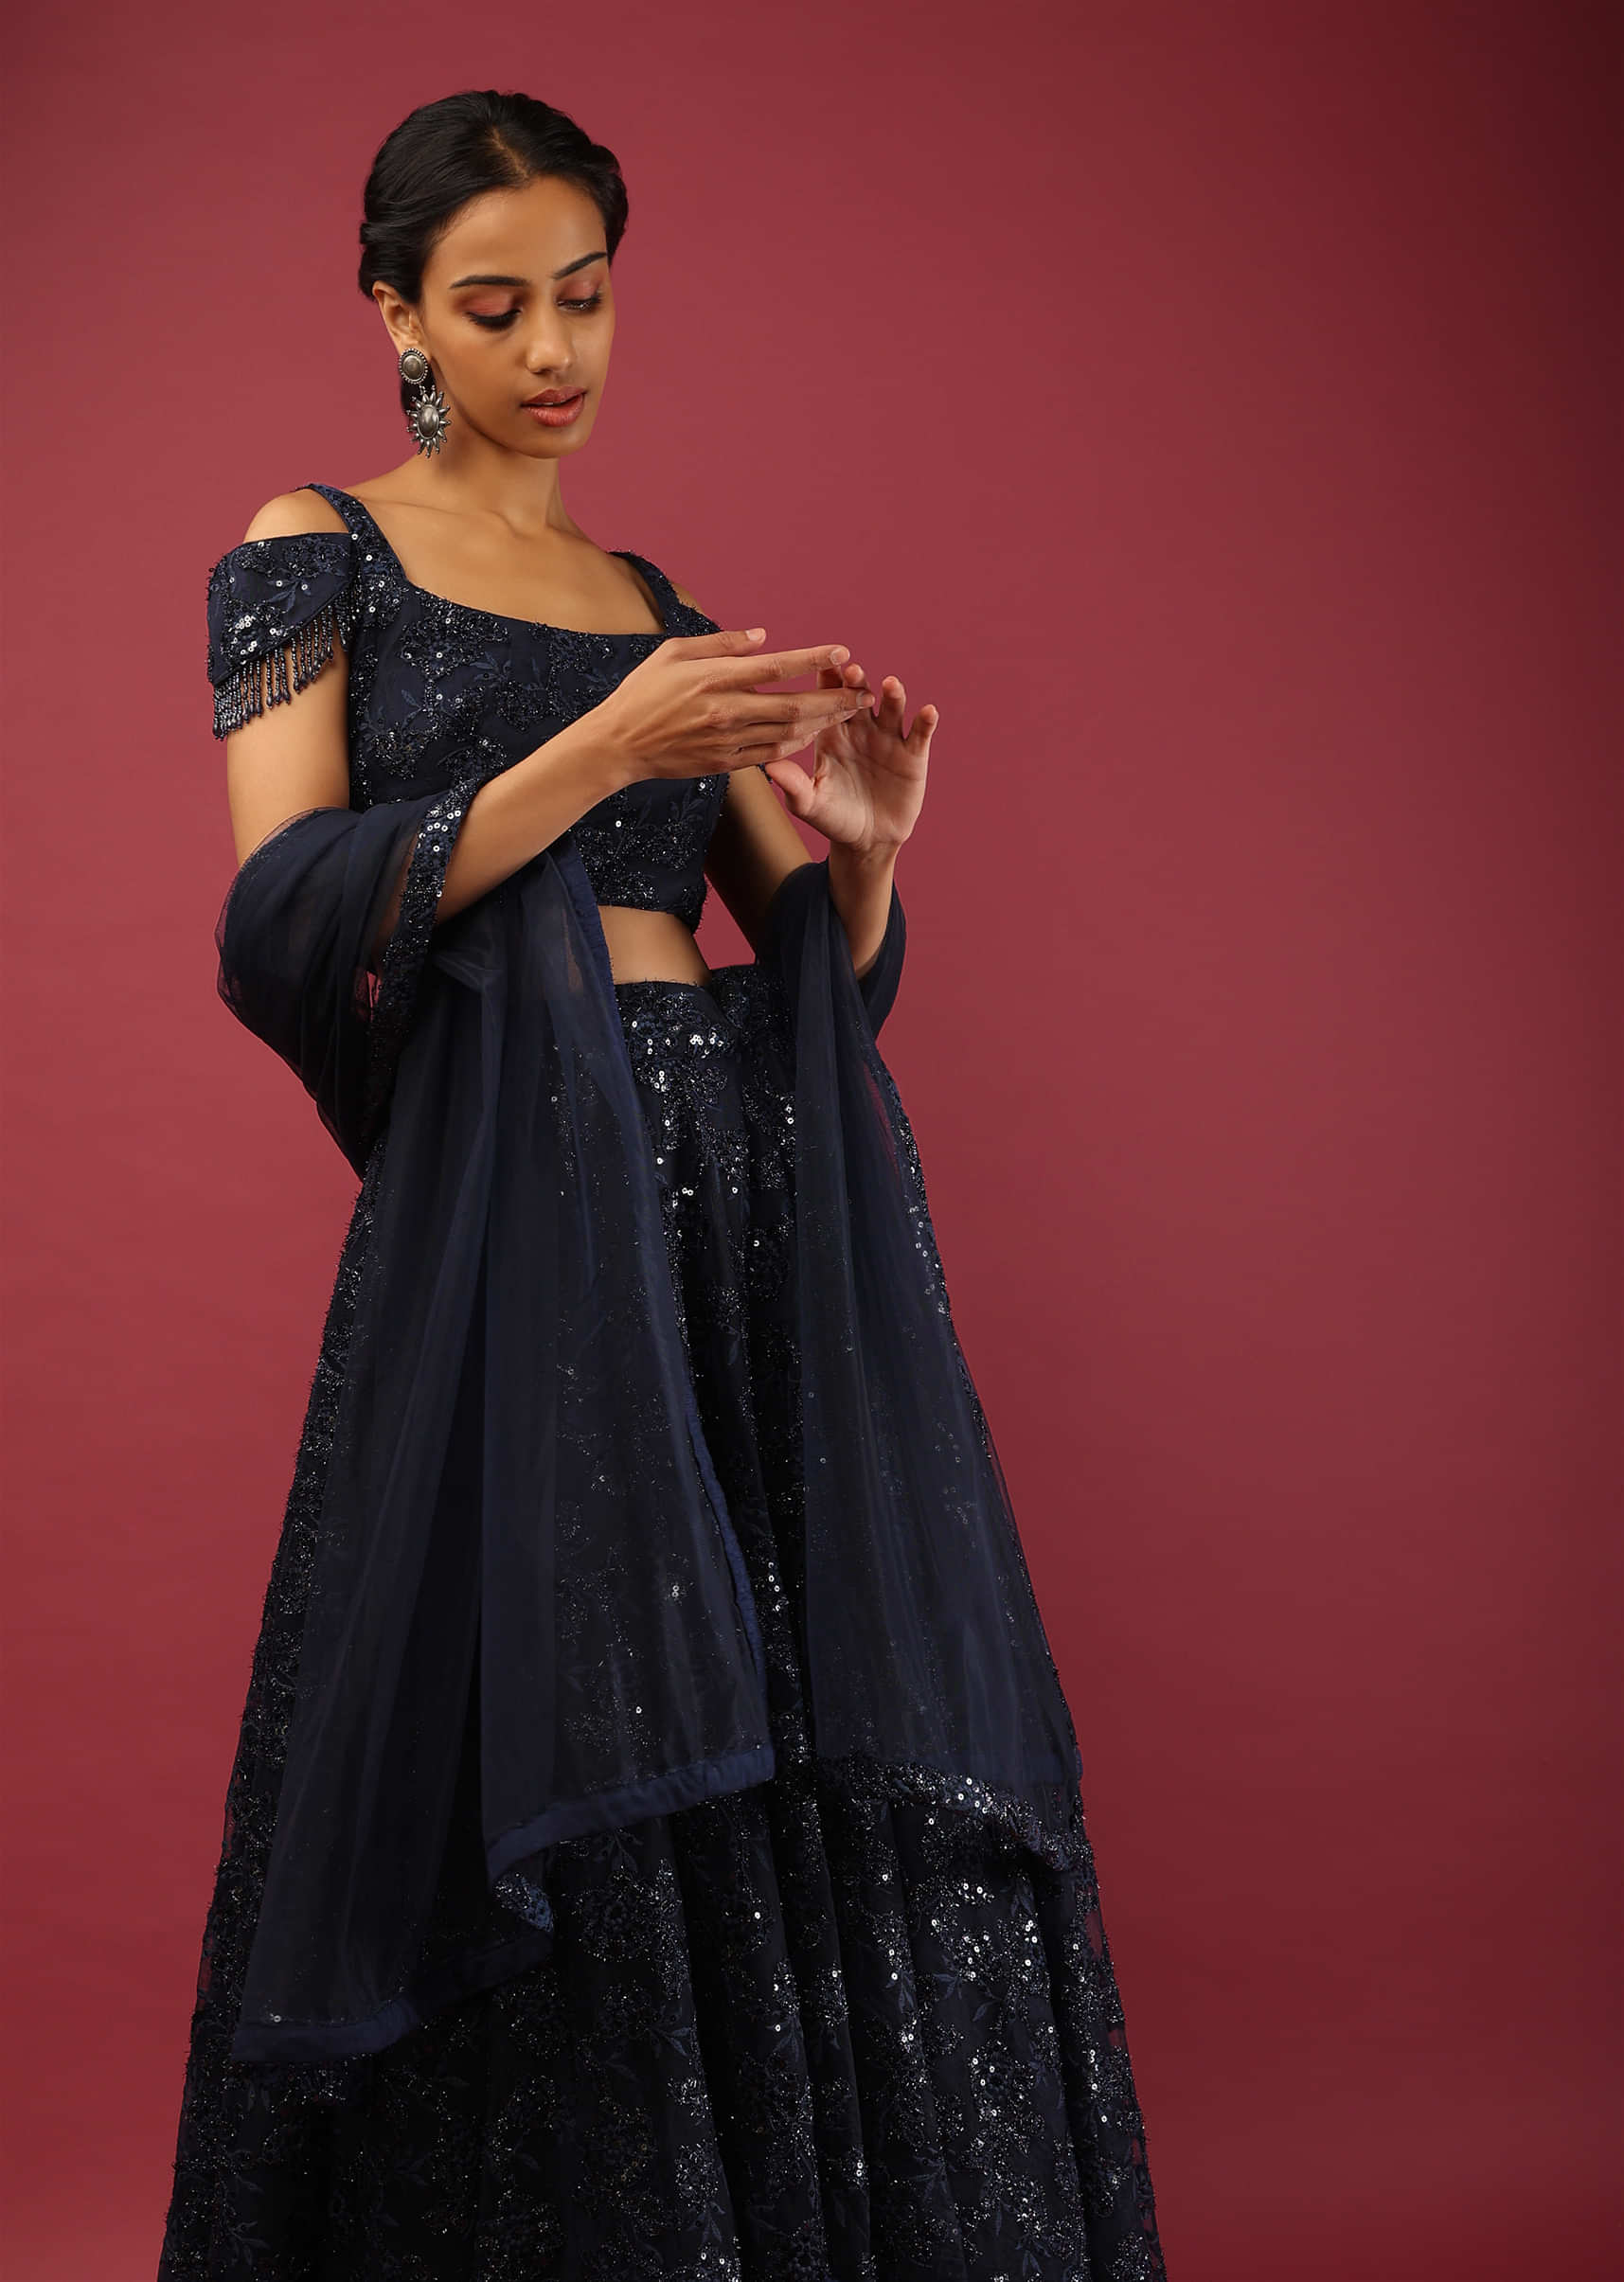 Midnight Blue Lehenga Choli In Embroidered Net With Bead Fringes On The Cold Shoulder Sleeves 